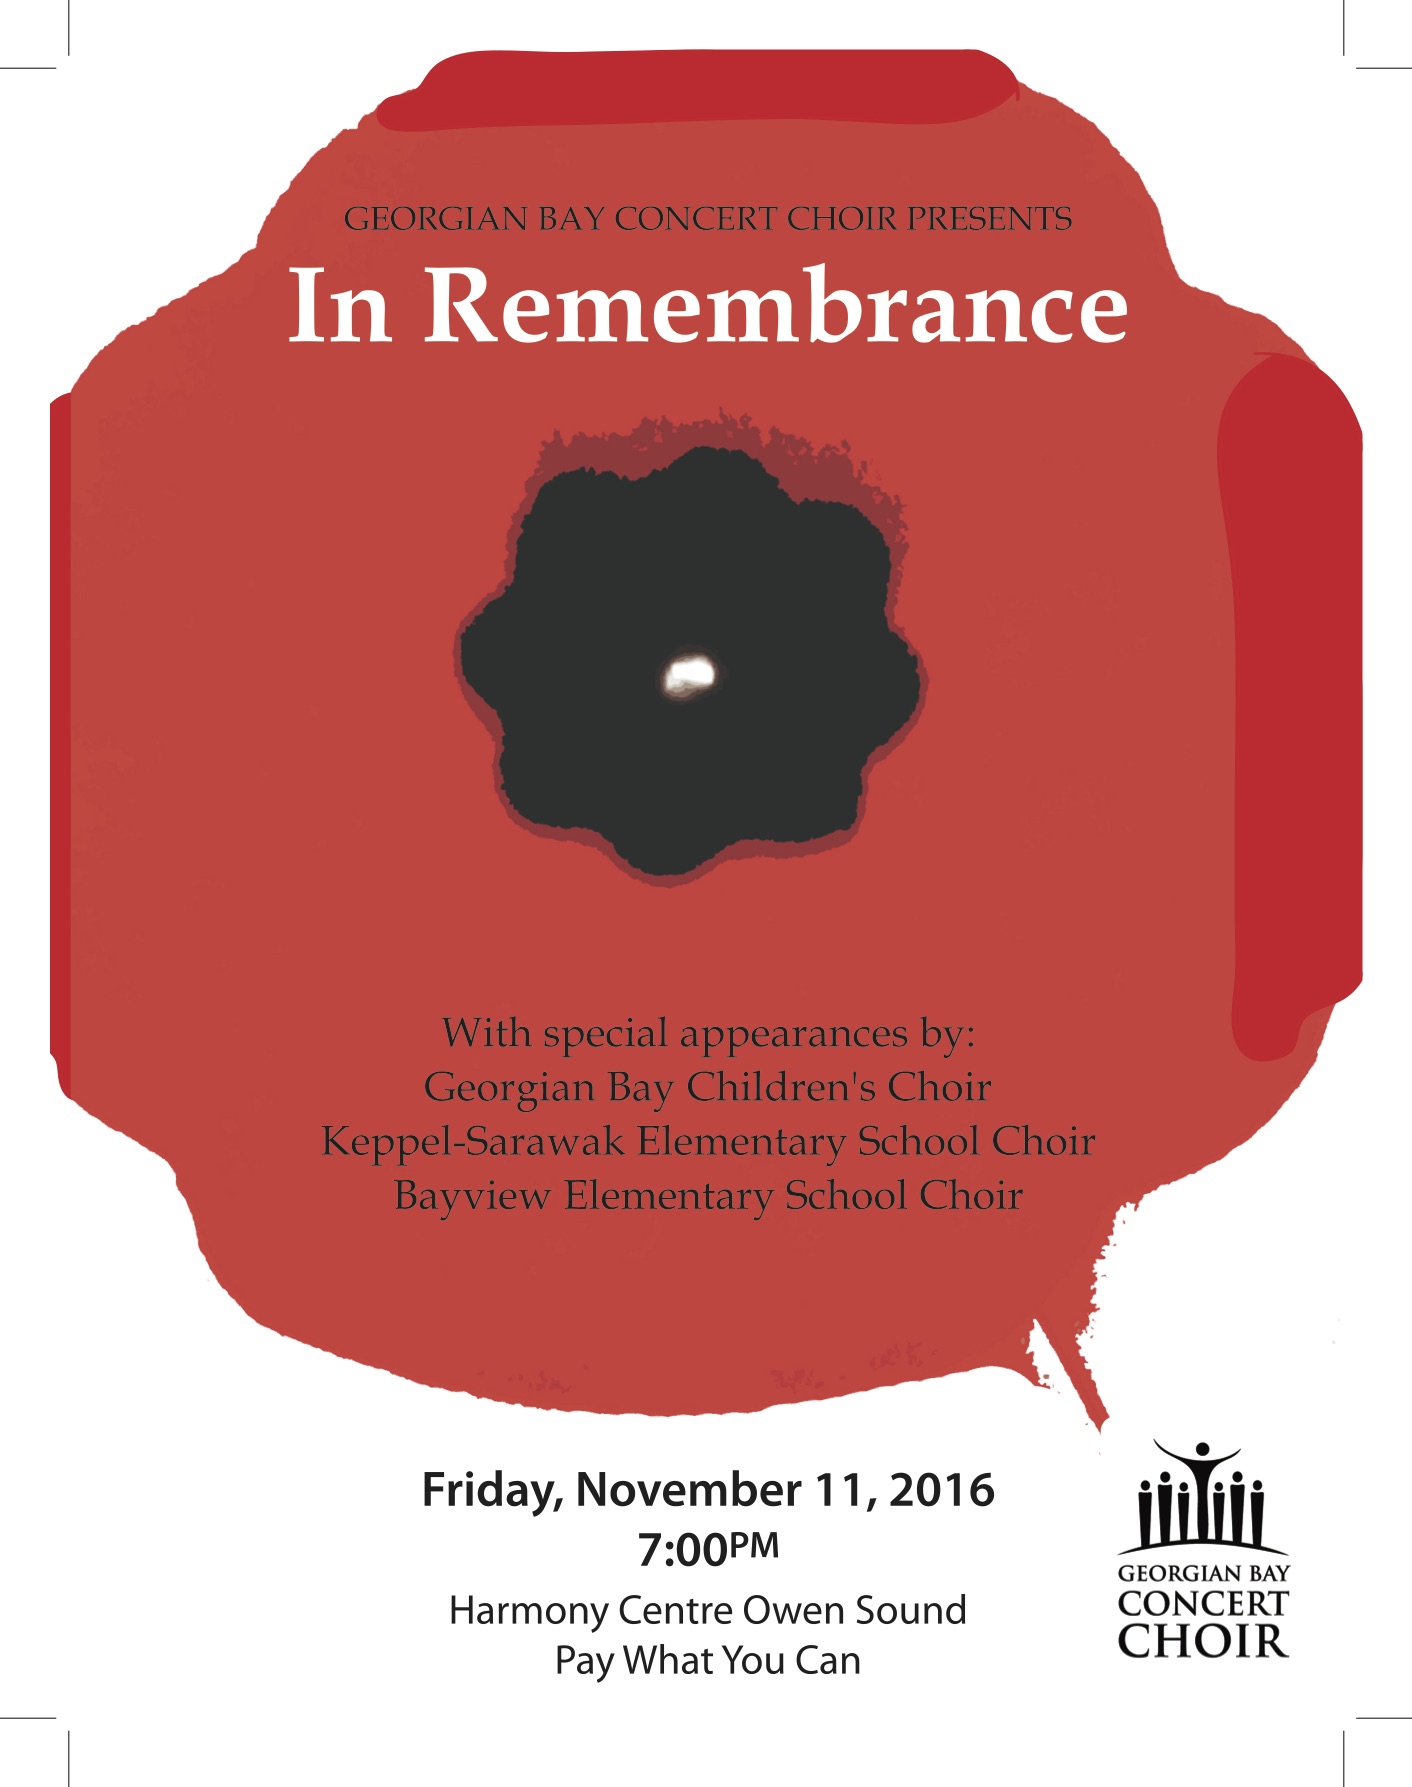 In Remembrance poster